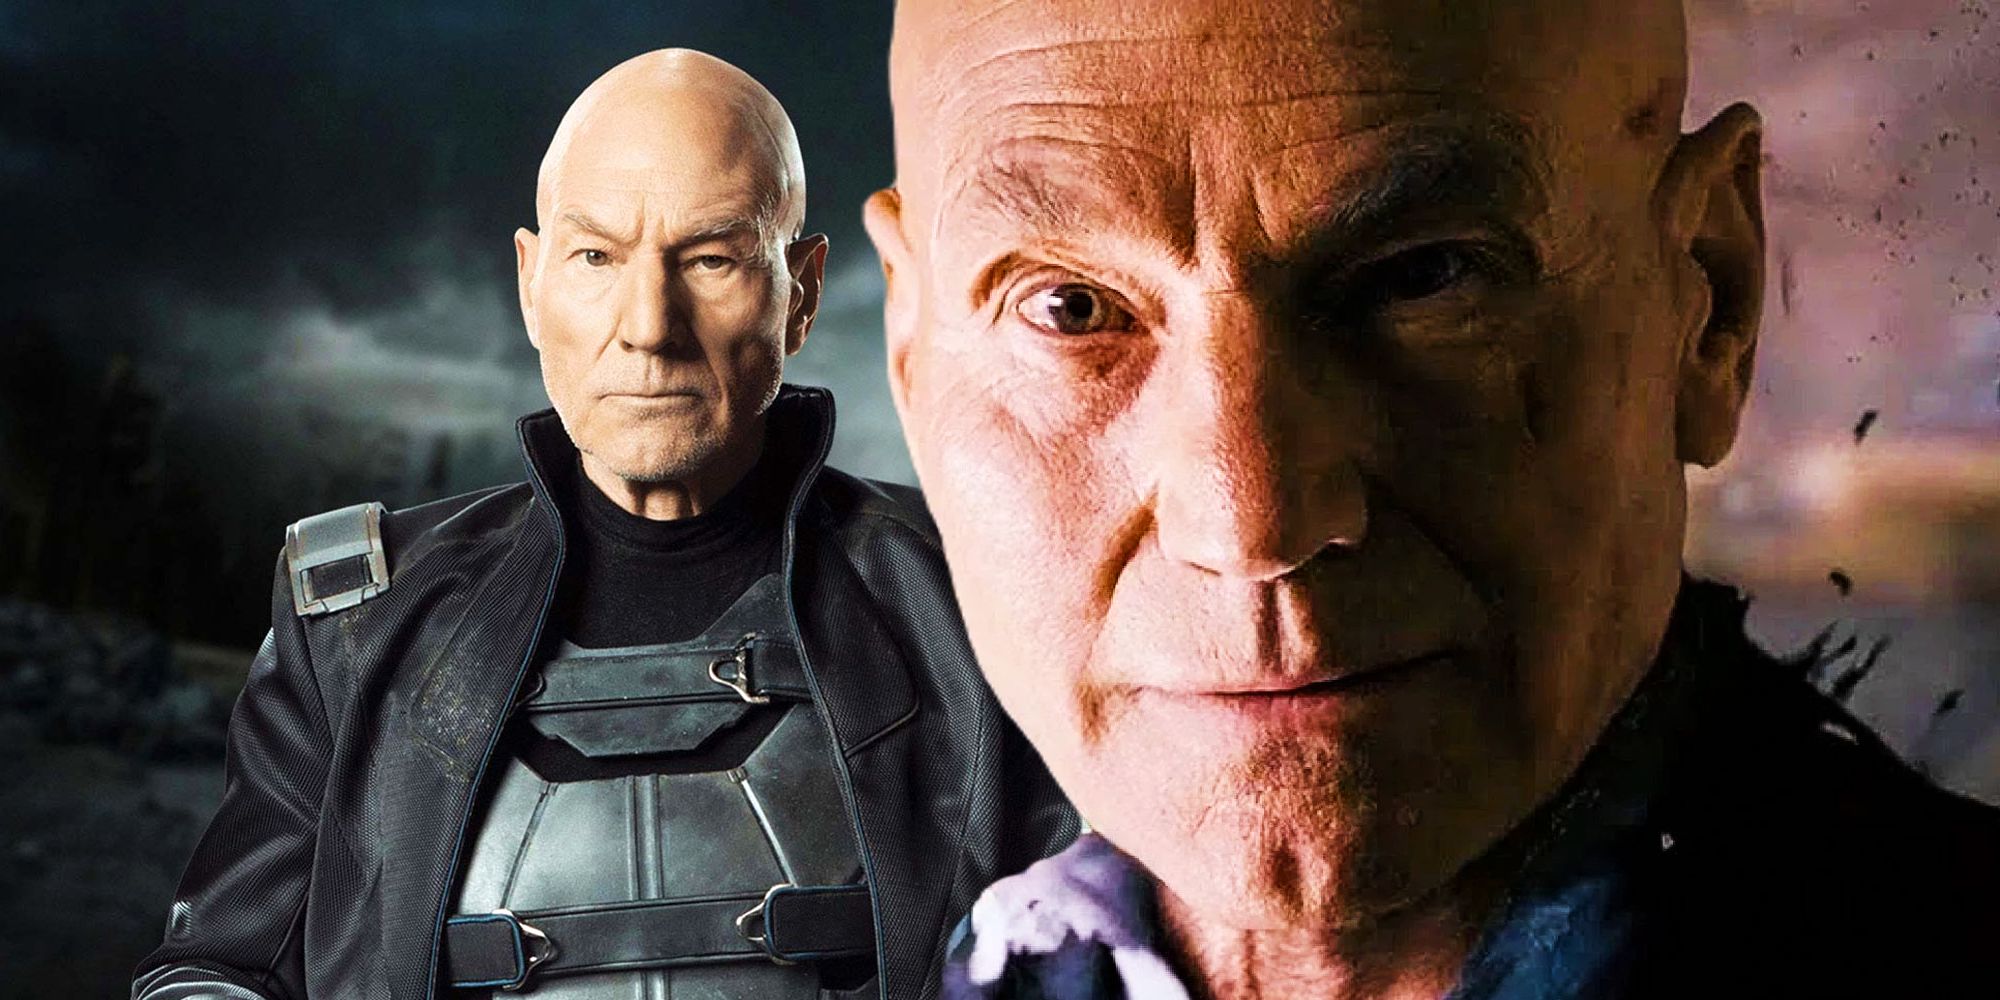 Every Time Professor X Died In The Movies (And How He Returned)